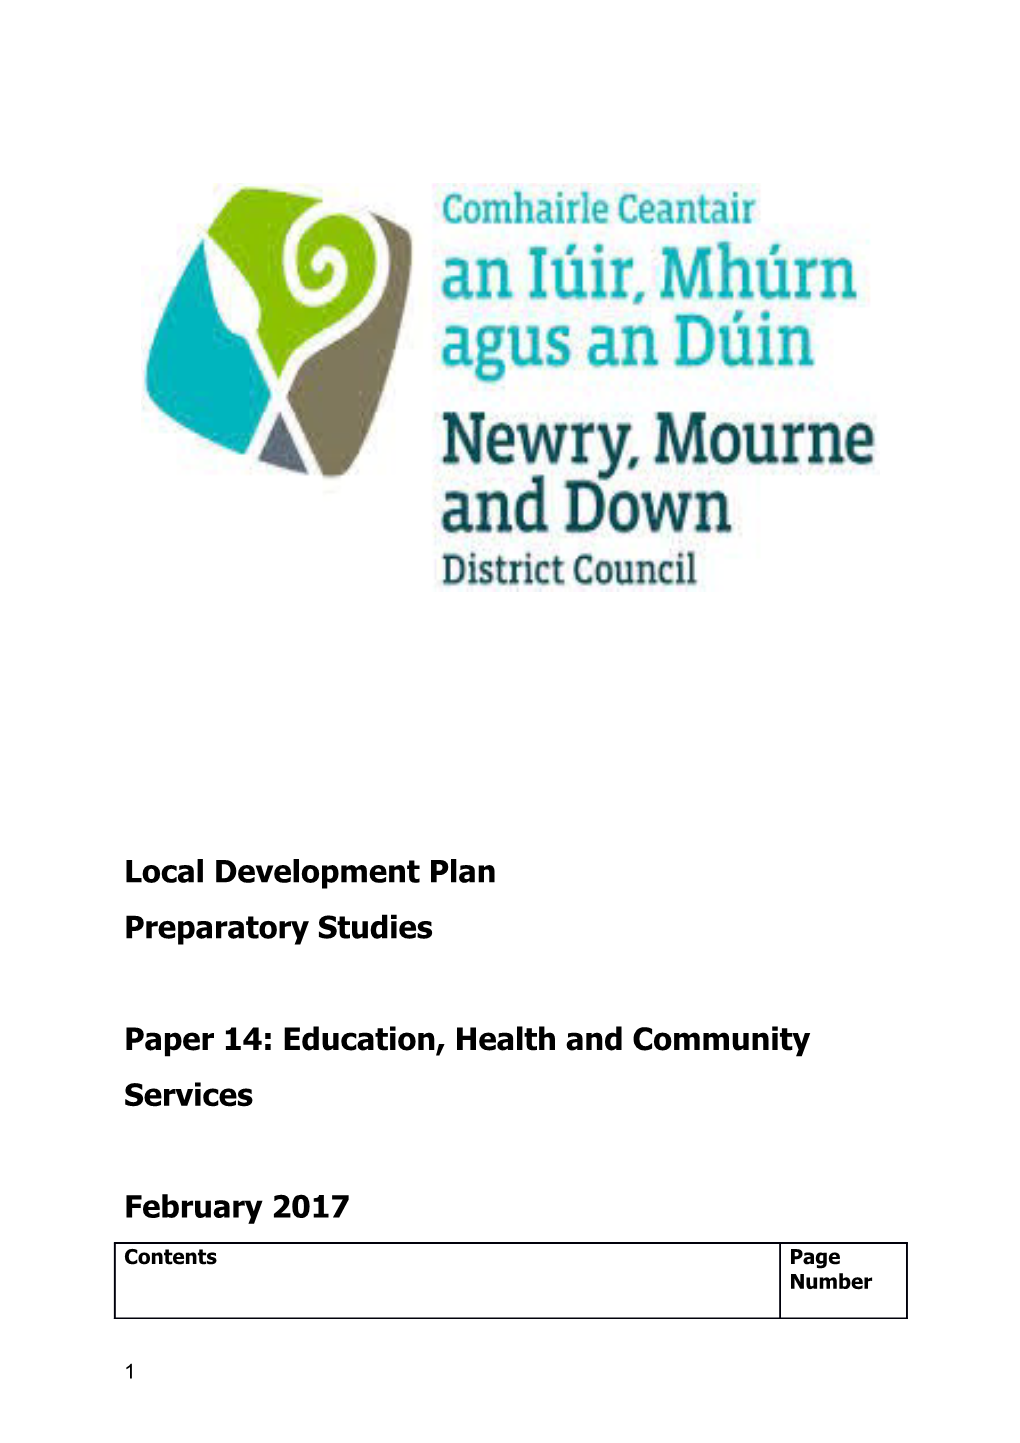 Paper 14: Education, Health and Community Services